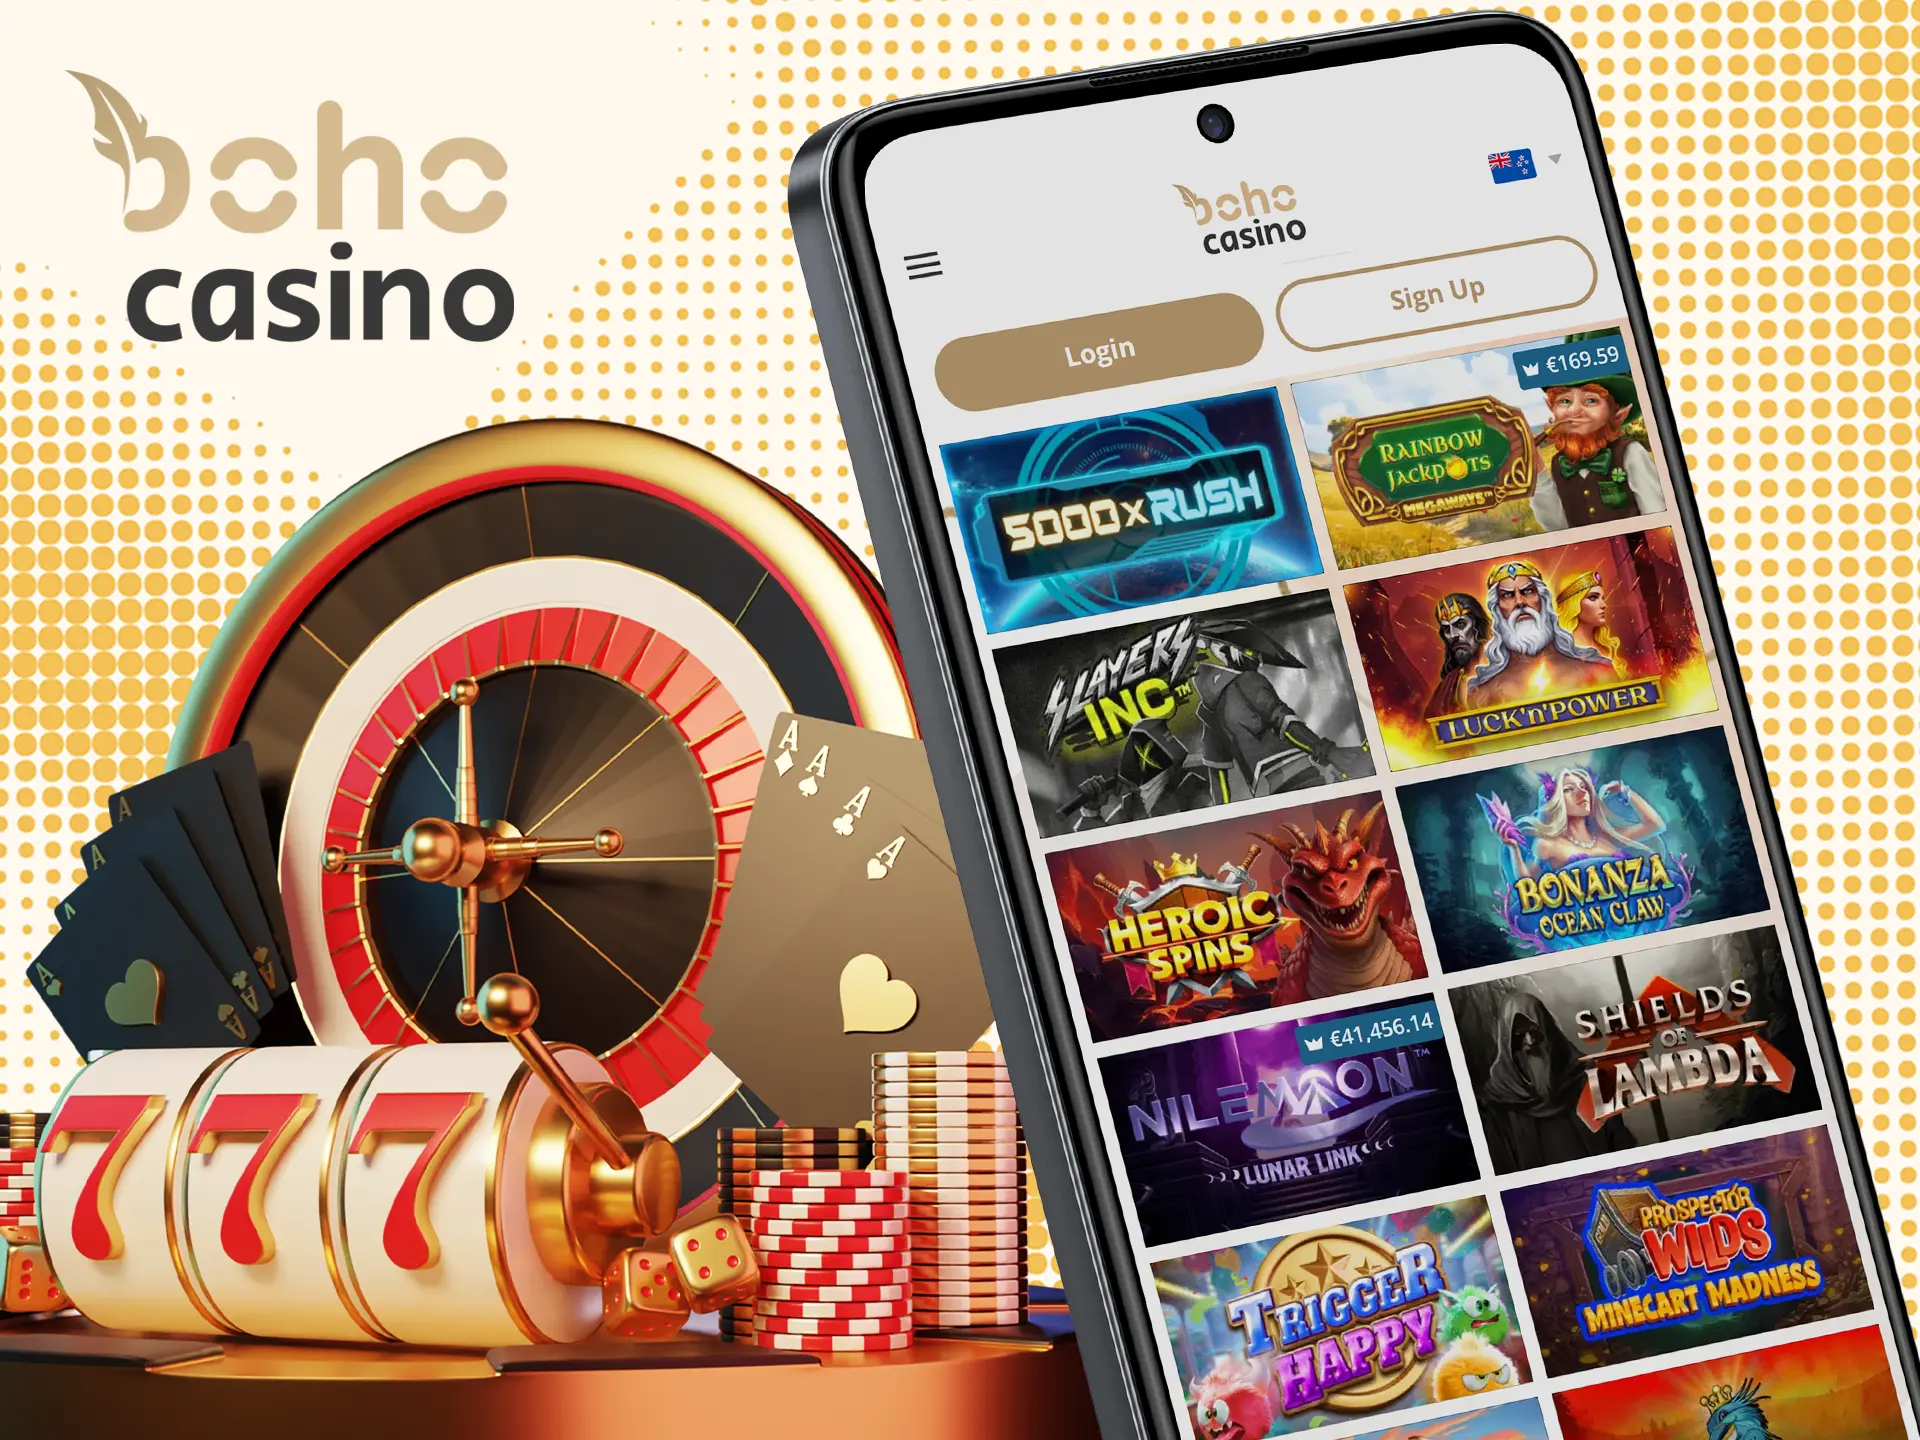 Learn more about the popular games that are available in the Boho Casino app.